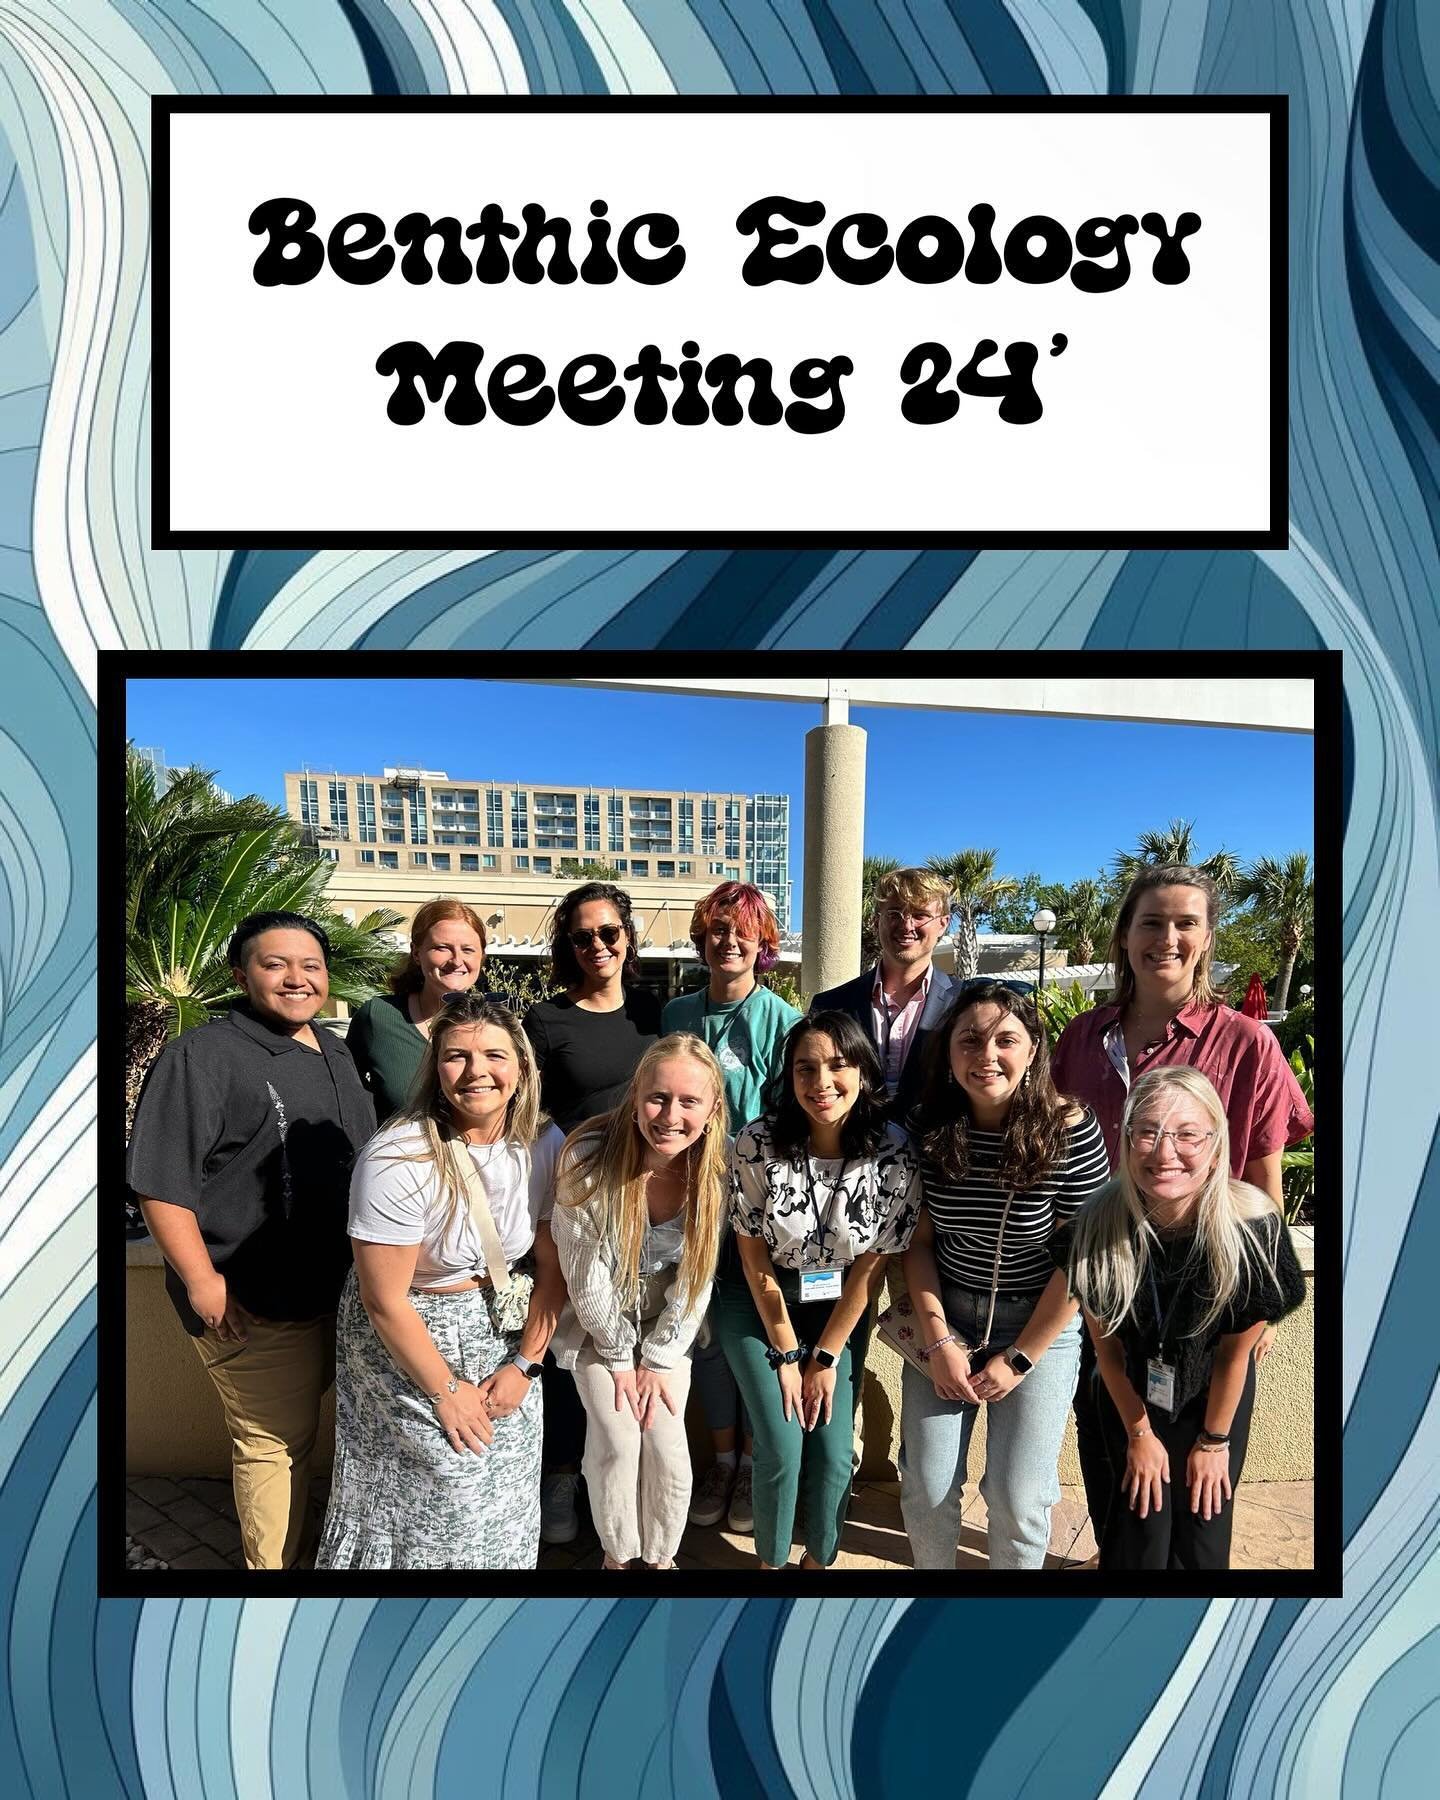 🛑 ✋ Stop, and swipe left for a dose of inspiration from some truly remarkable folks! 🤩🤯

Our Coffey-Bahr crew rocked the Benthic Ecology Meeting in Charleston, SC last week! The Benthic Ecology Meeting Society (BEMS) is a non-profit organization t